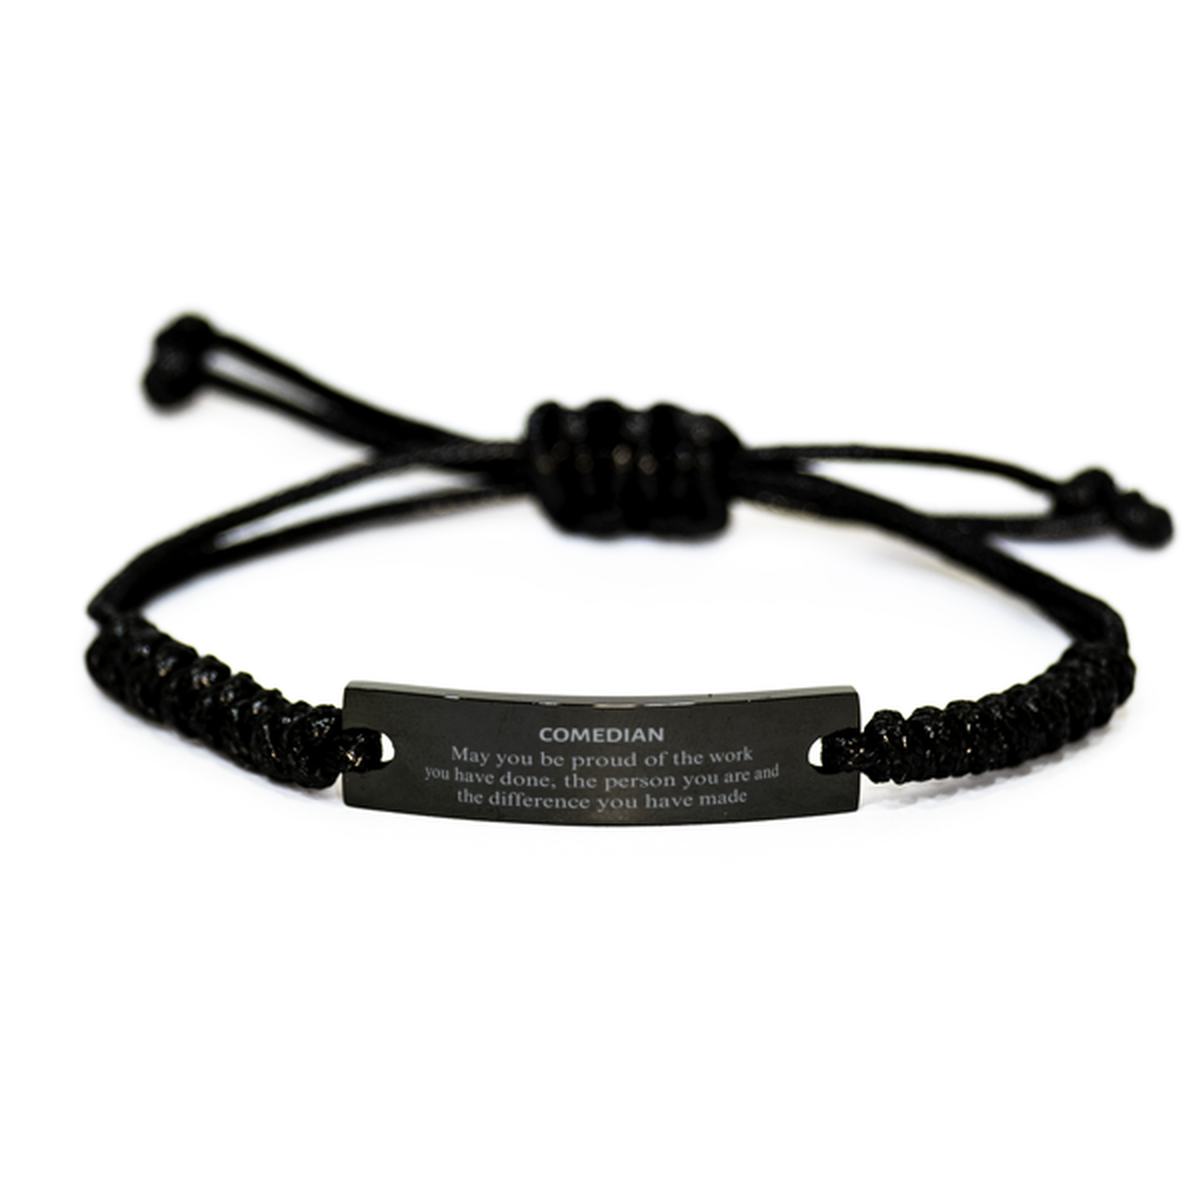 Comedian May you be proud of the work you have done, Retirement Comedian Black Rope Bracelet for Colleague Appreciation Gifts Amazing for Comedian